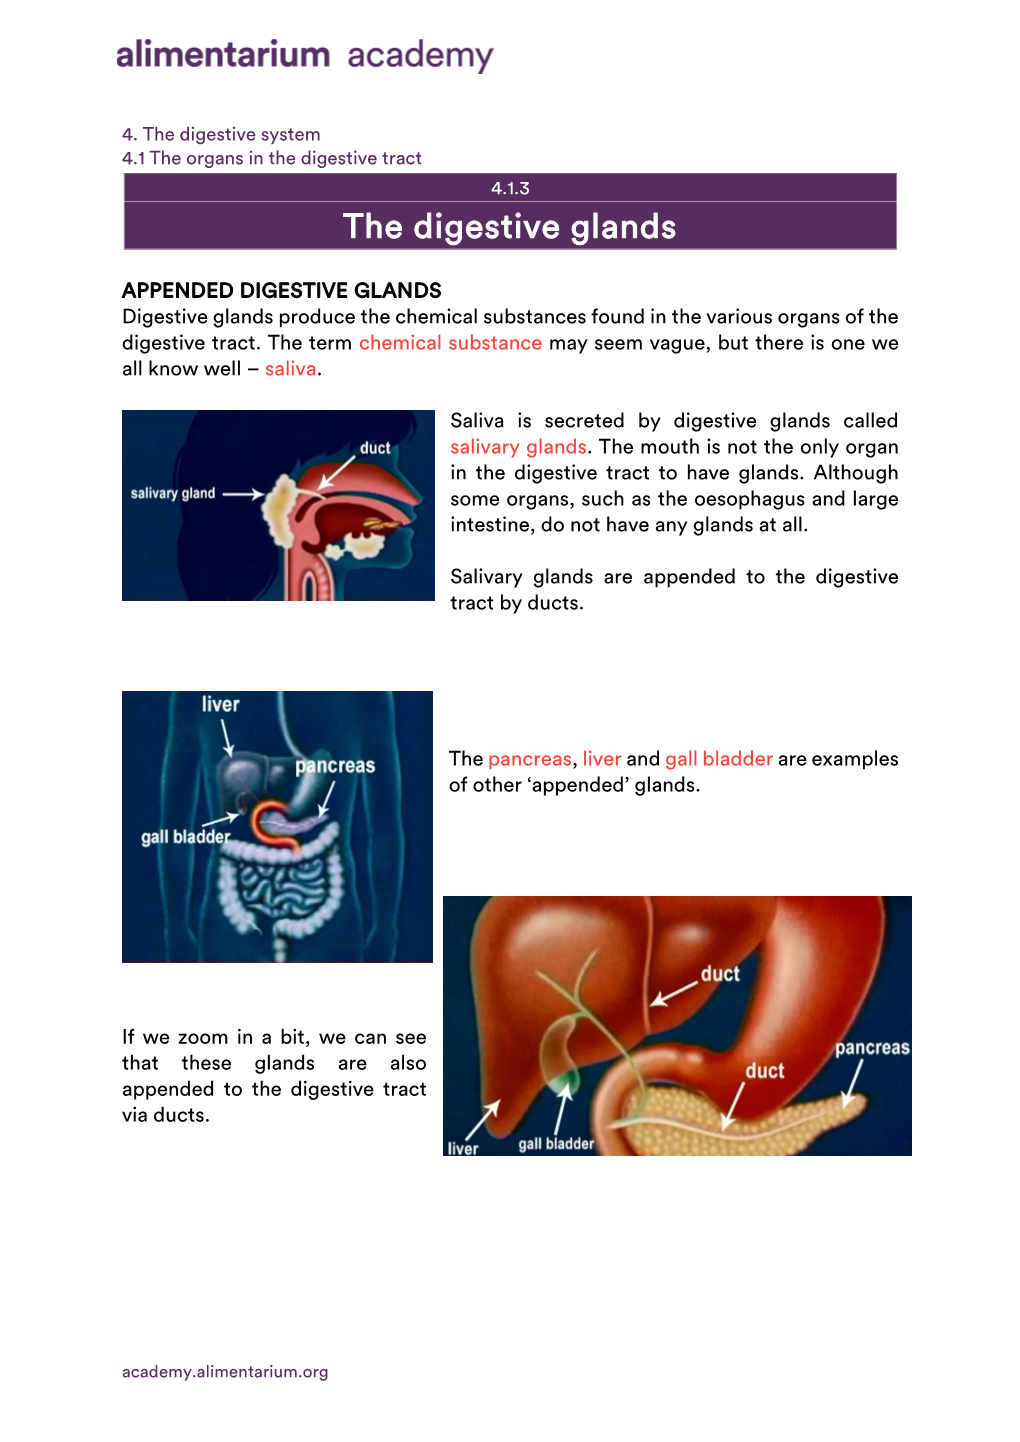 The Digestive Glands